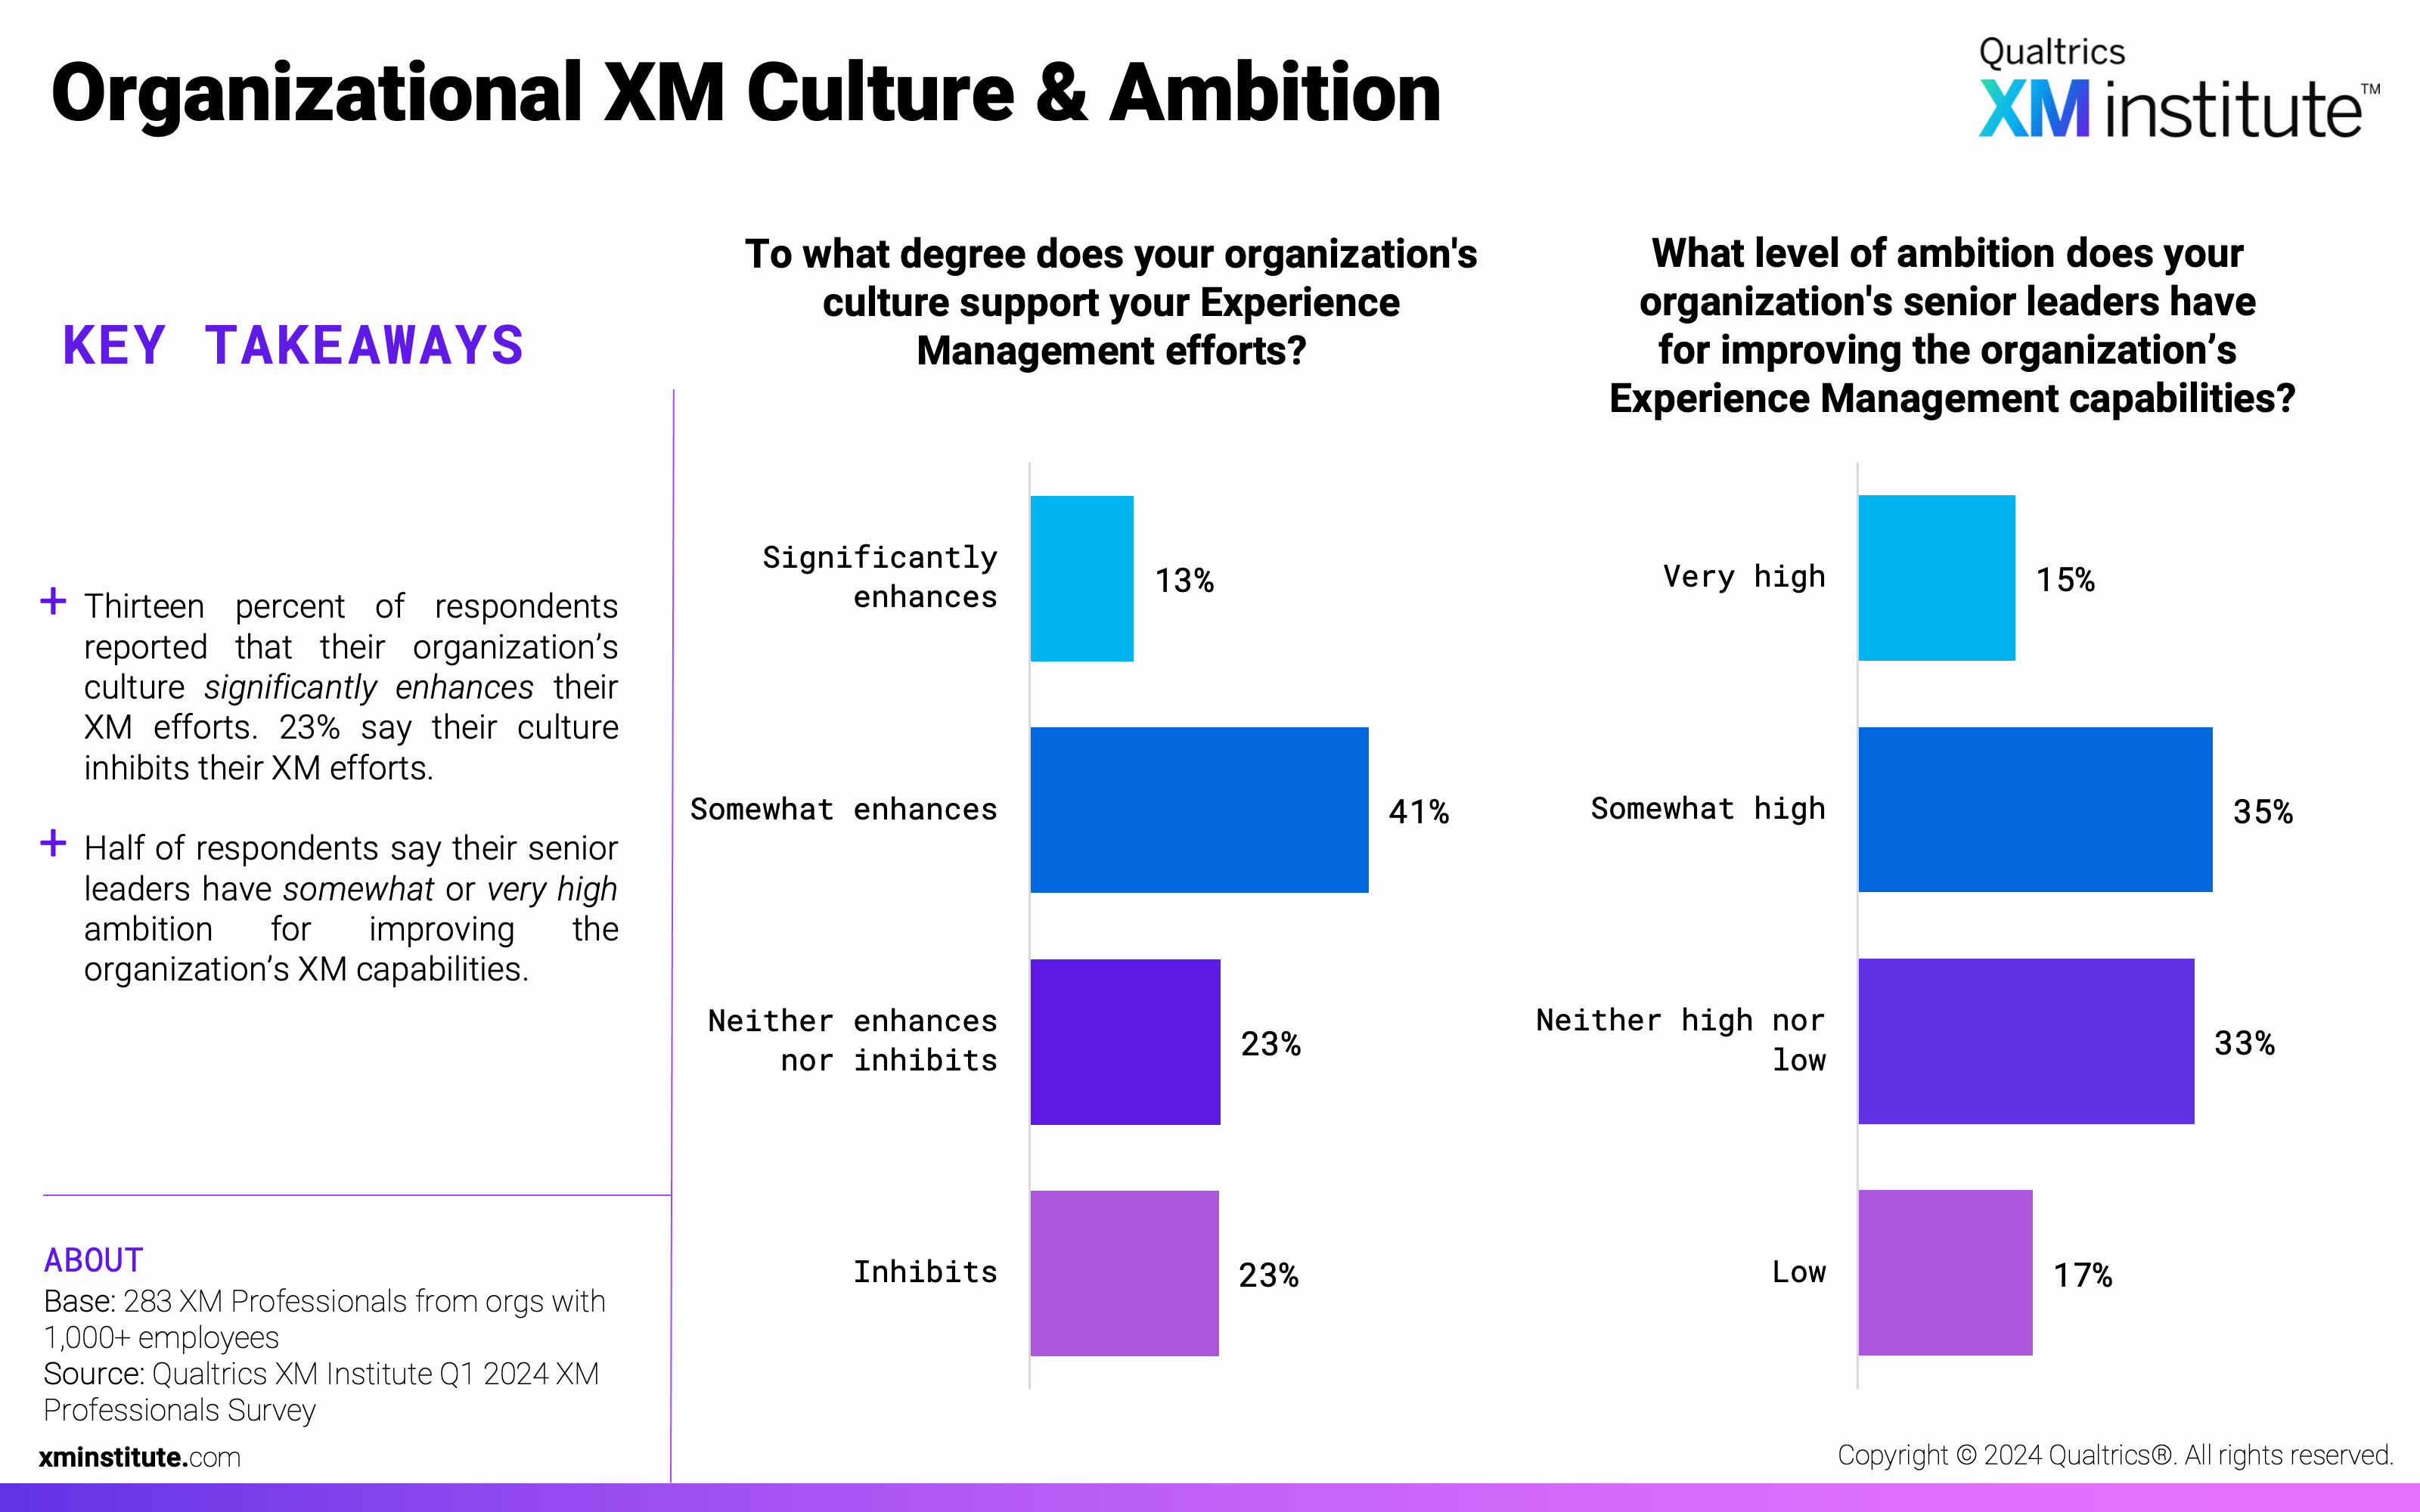 These charts show how respondents rate their organizations XM culture and leaders' XM ambition. 